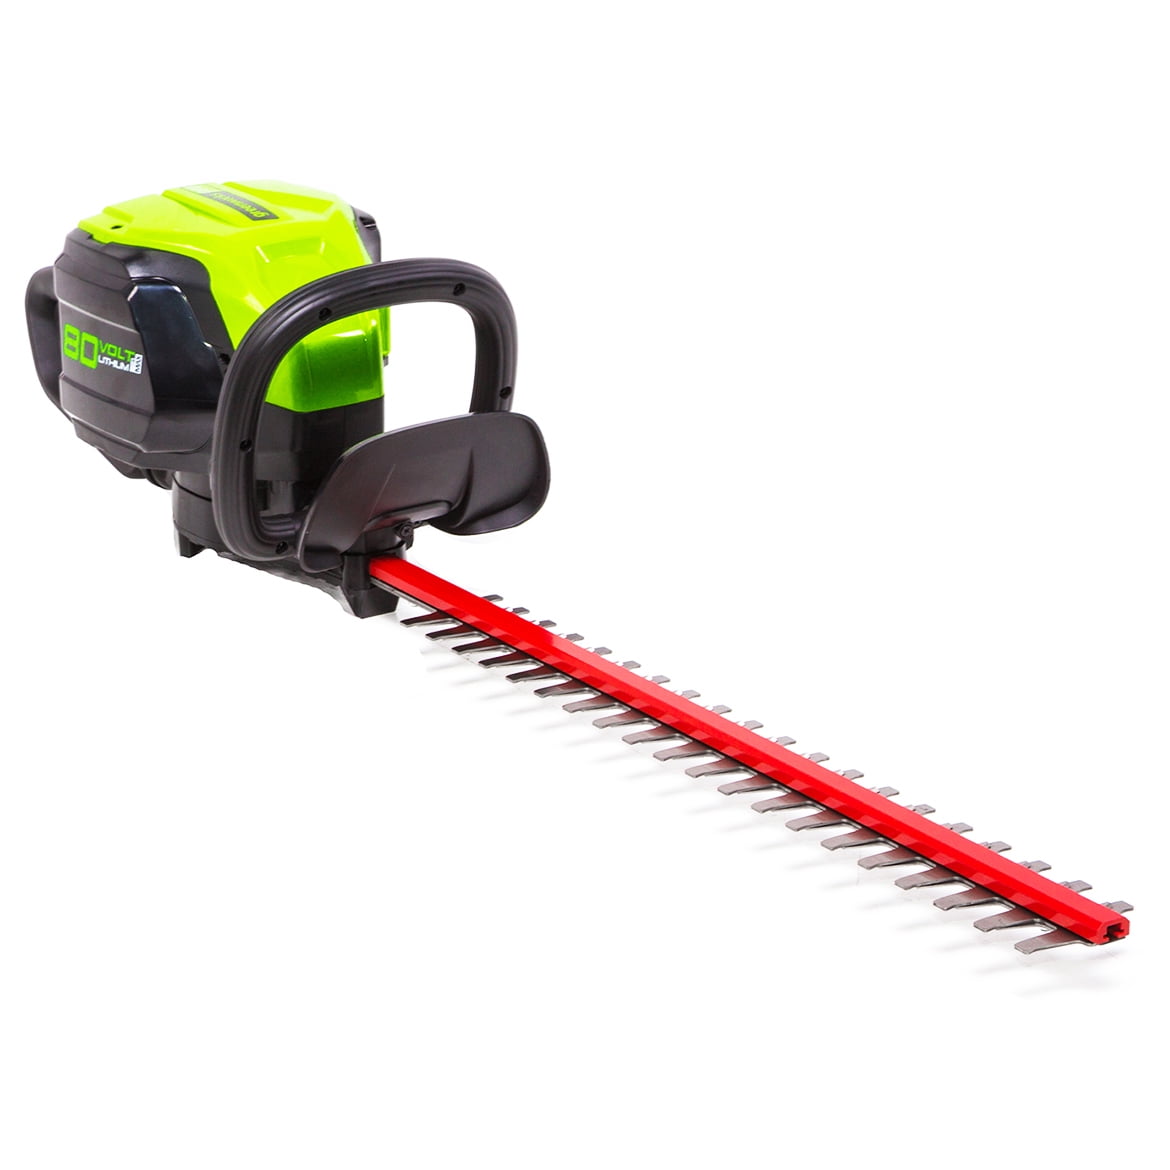 Greenworks HT80L00 Pro 80V 24-Inch Brushless Hedge Trimmer Renewed 24 inches Battery Not Included Black and Green 